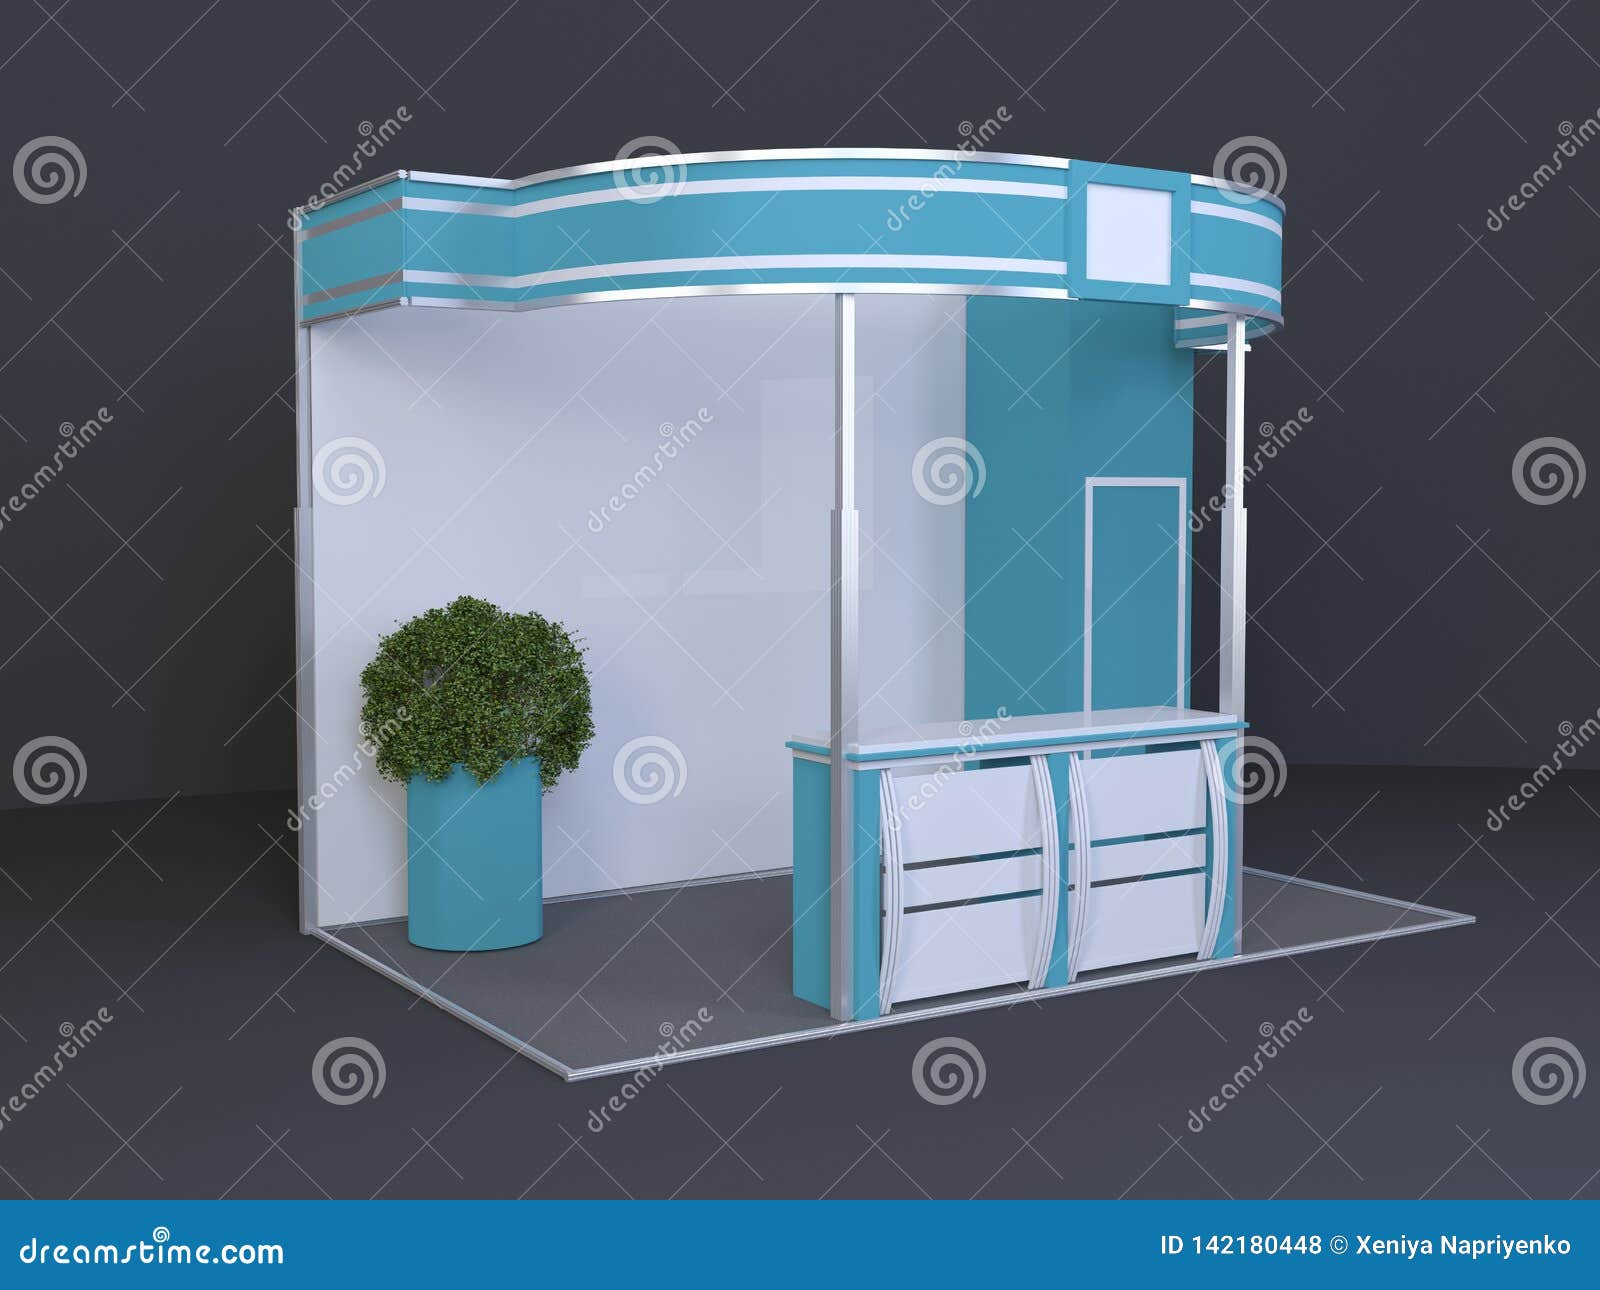 Download Trade Exhibition Stand 3x4 Meters With Plant 3d Rendered Illustration Template Mockup Stock Photo Image Of Banner Brochure 142180448